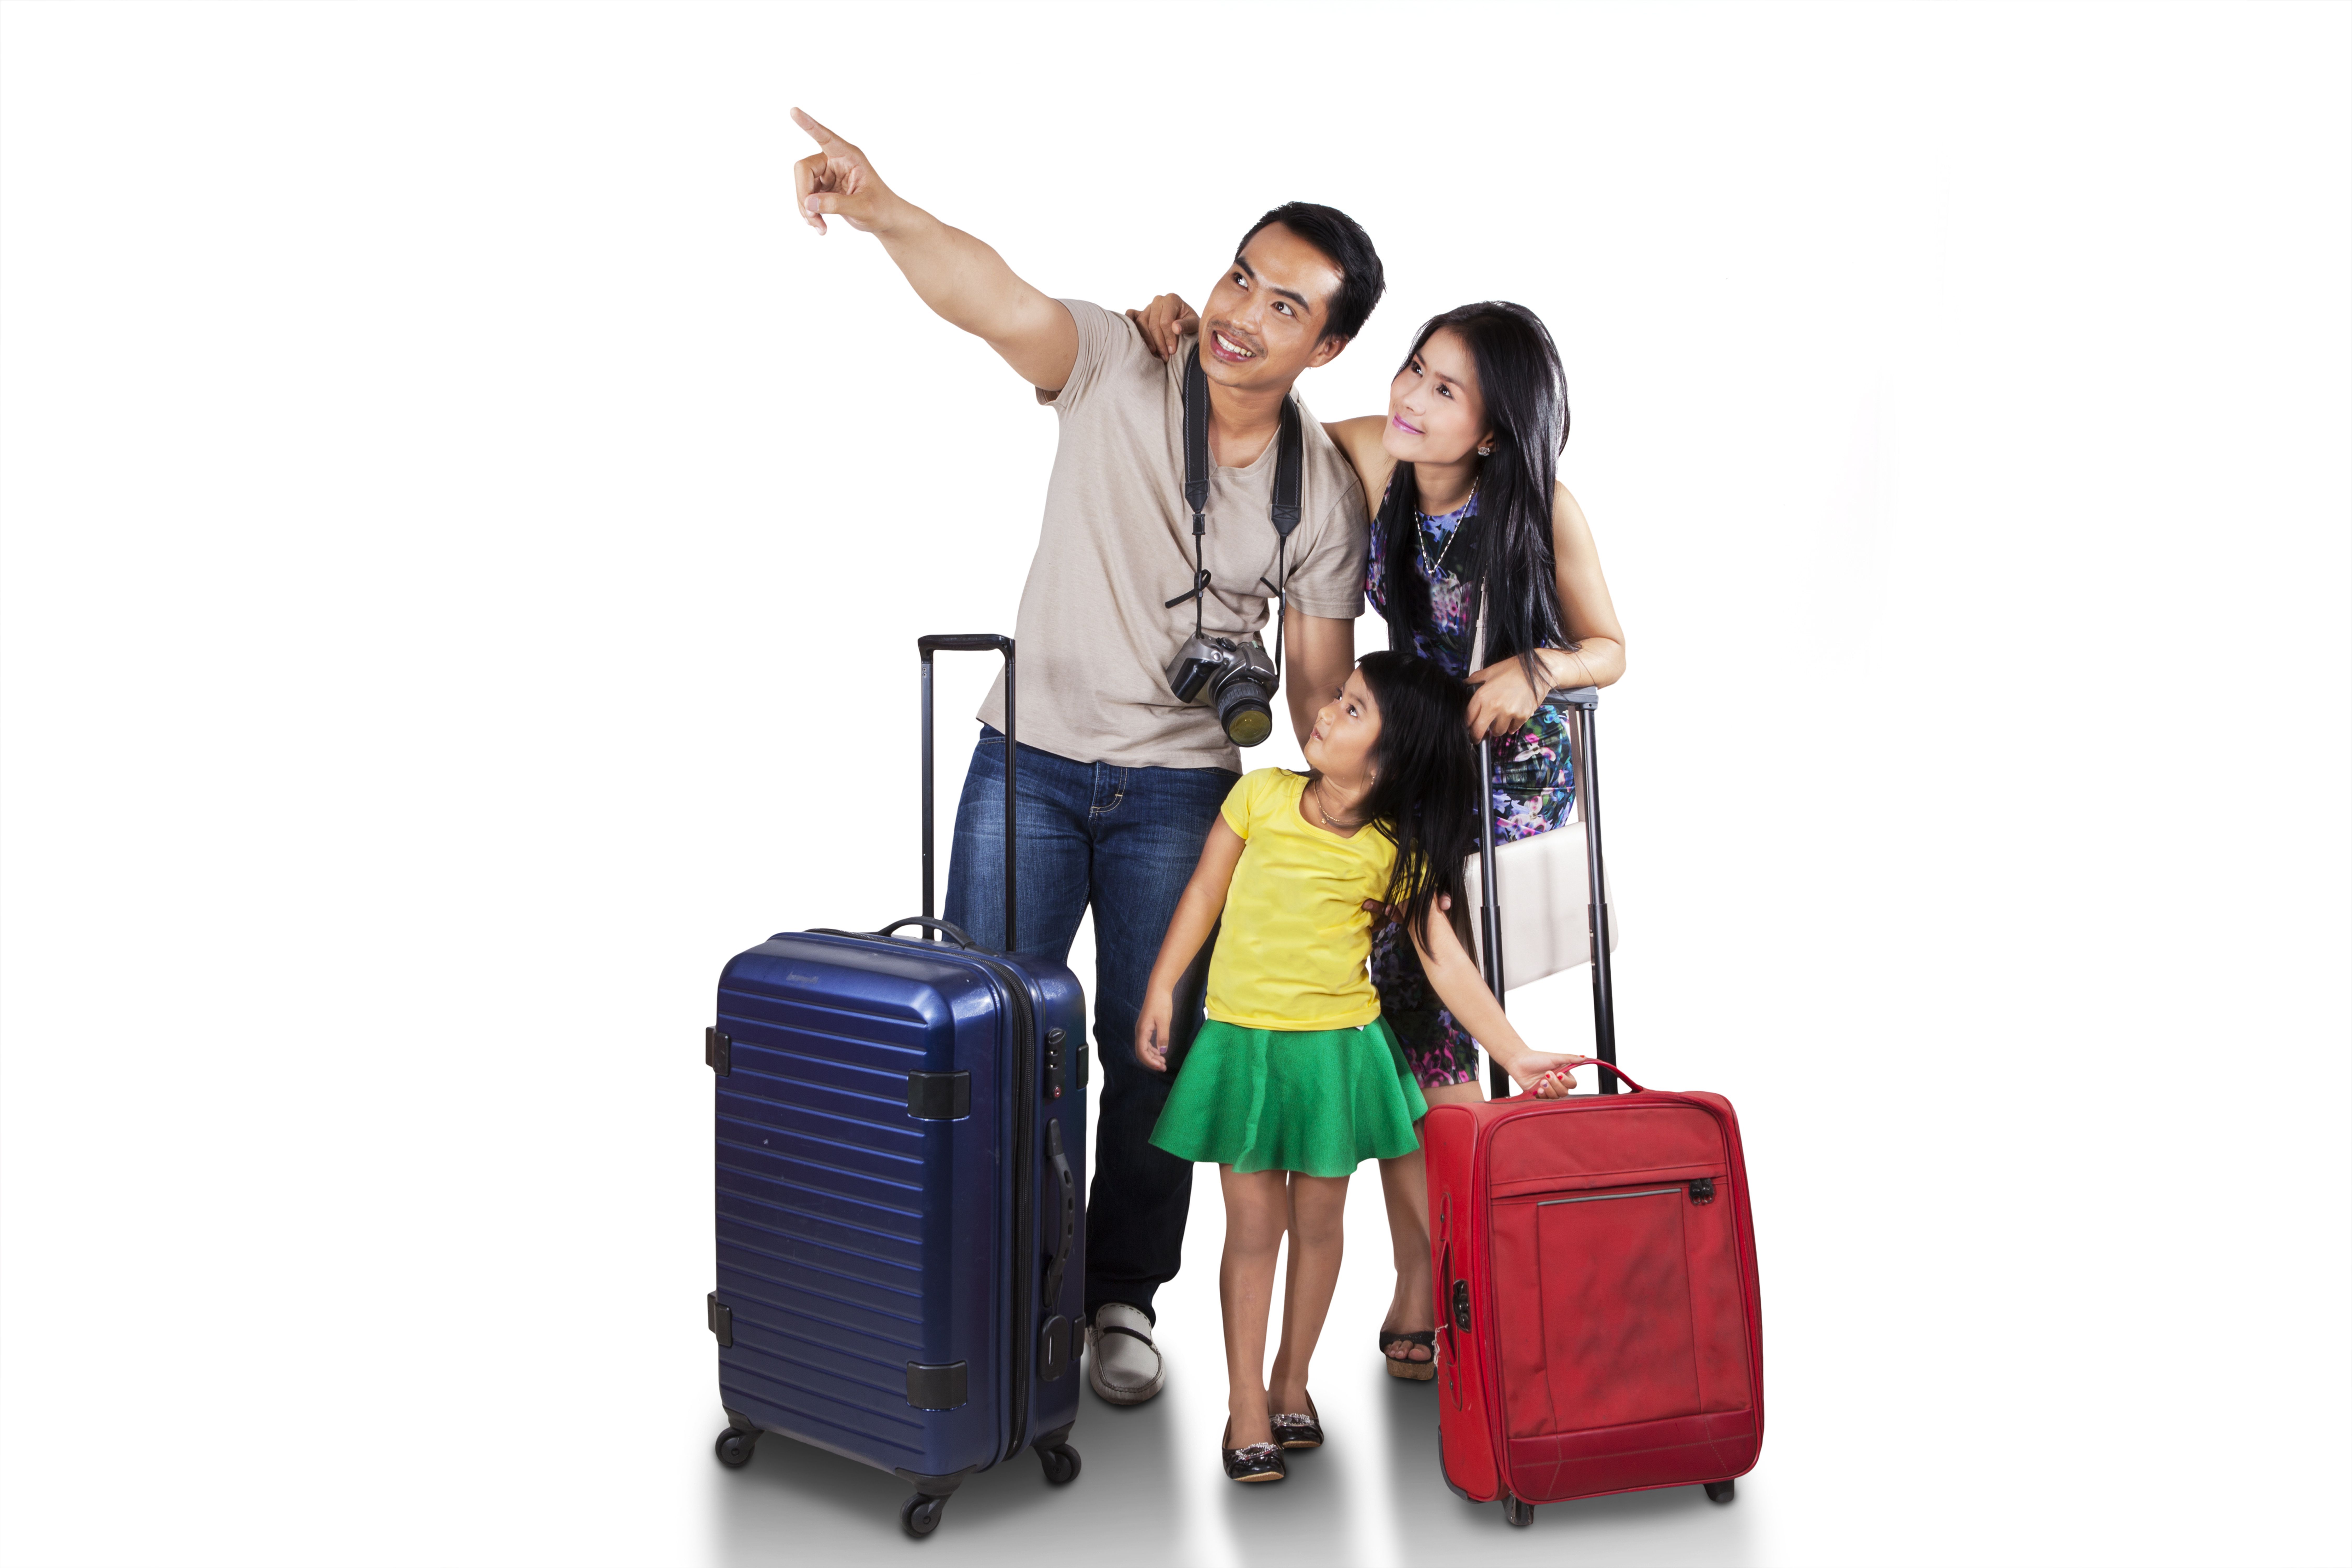 Father pointing into the distance with his wife, young daughter and their luggage